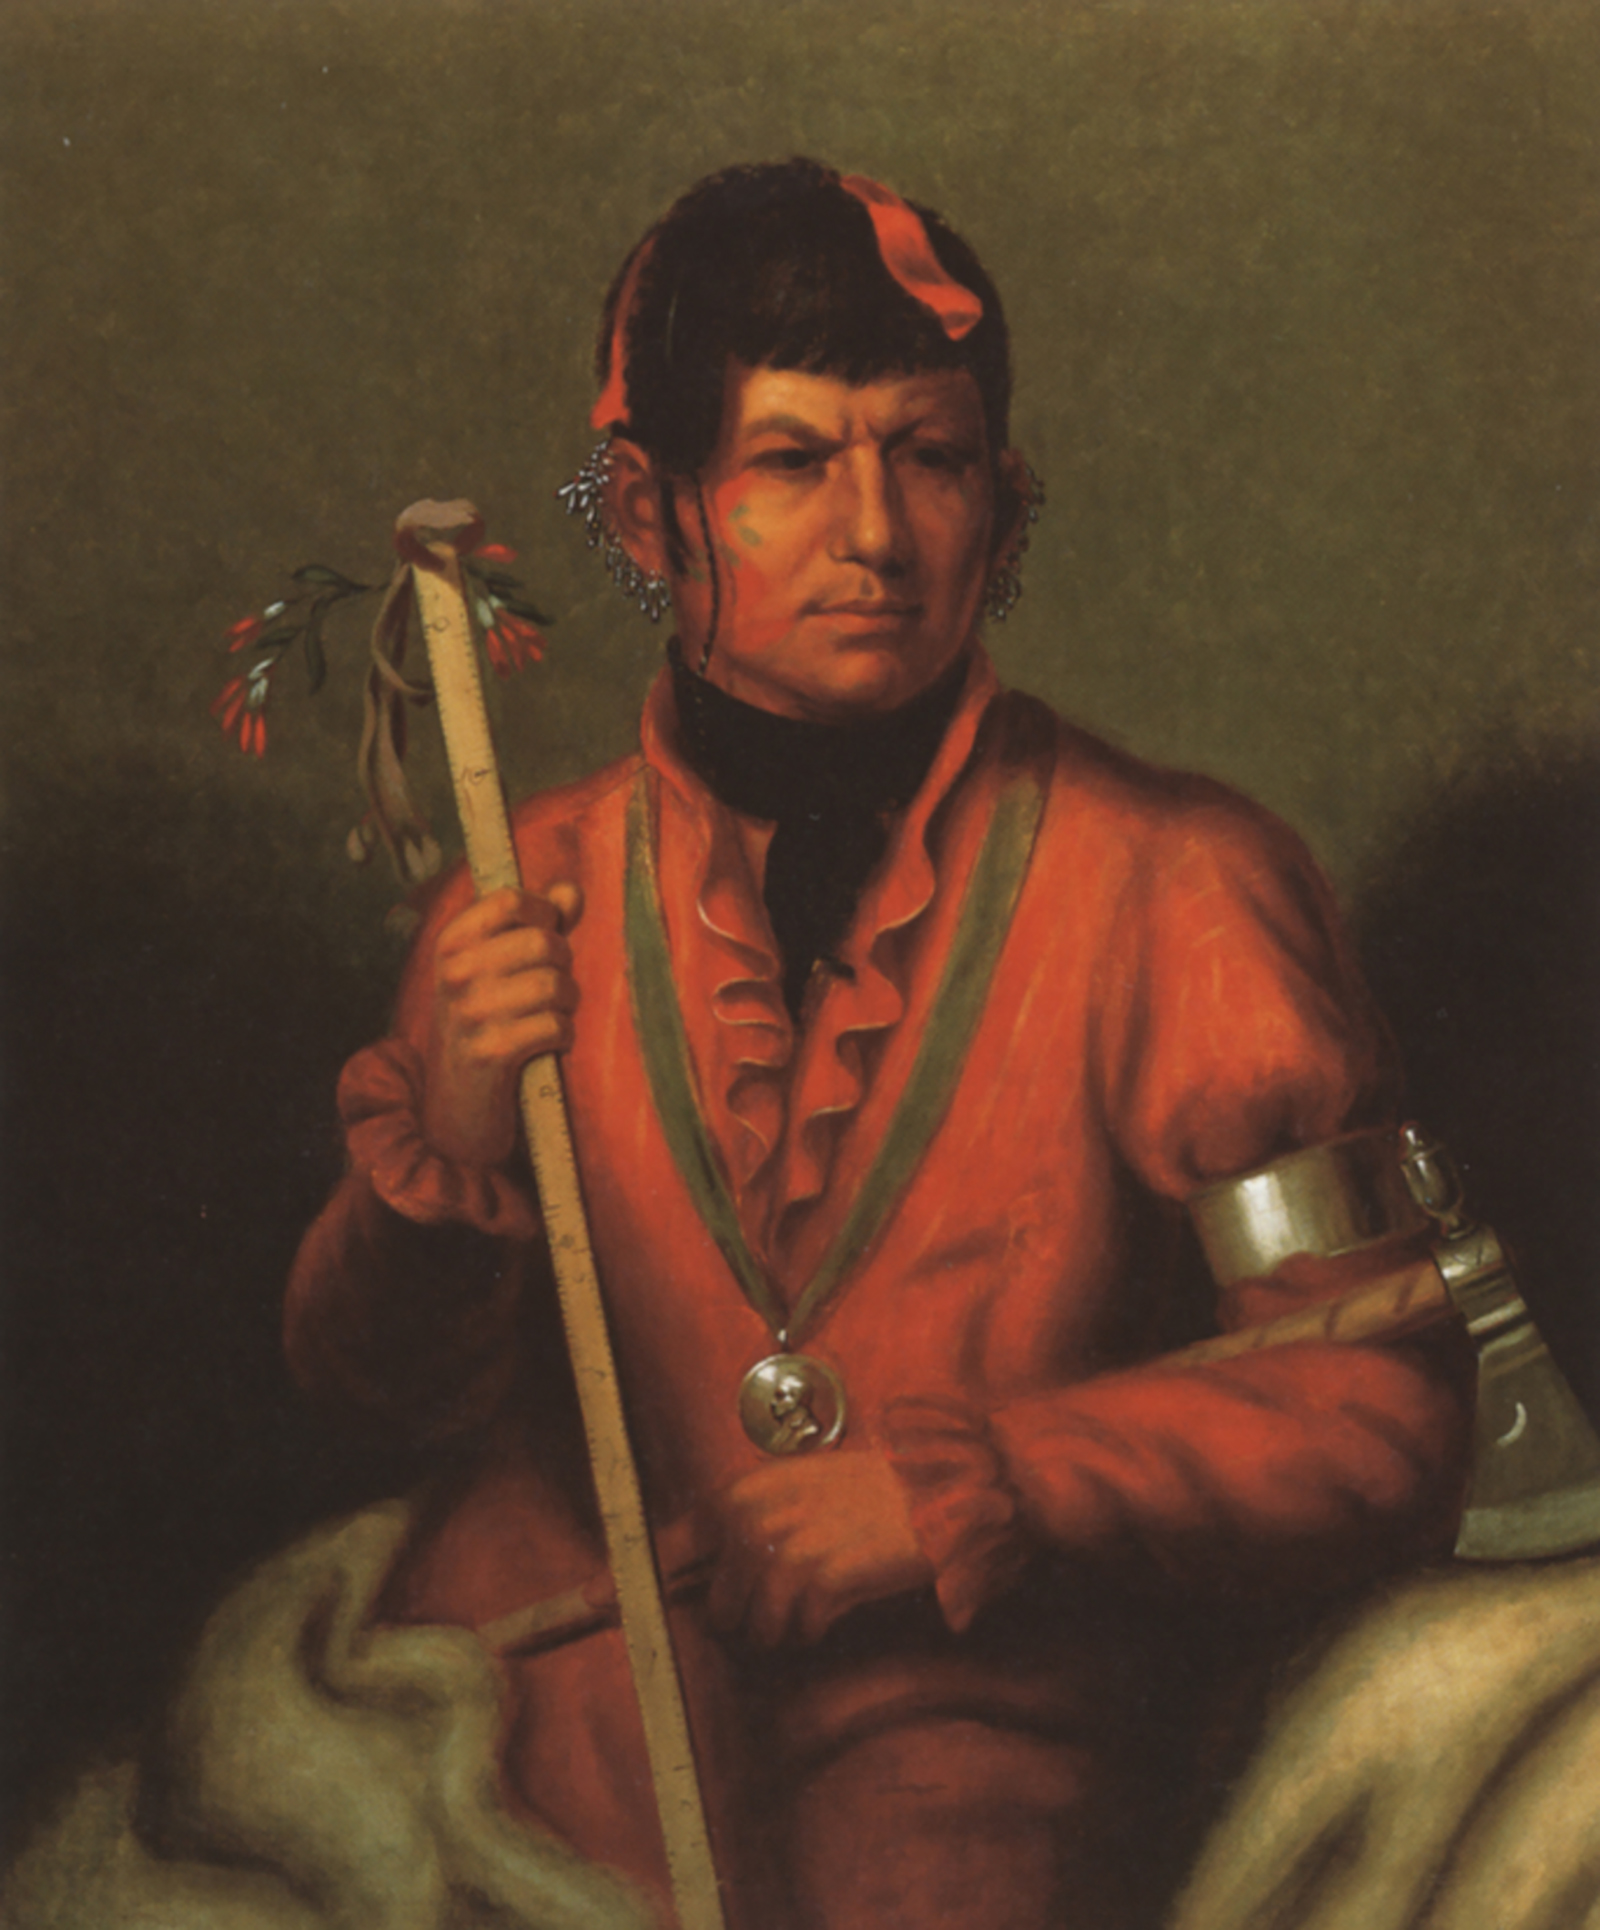 Tshi-Zun-Hau-Kau (He-Who-Runs-with-Deer), Winnebago by Henry Inman, after Charles Bird King, after James Otto Lewis